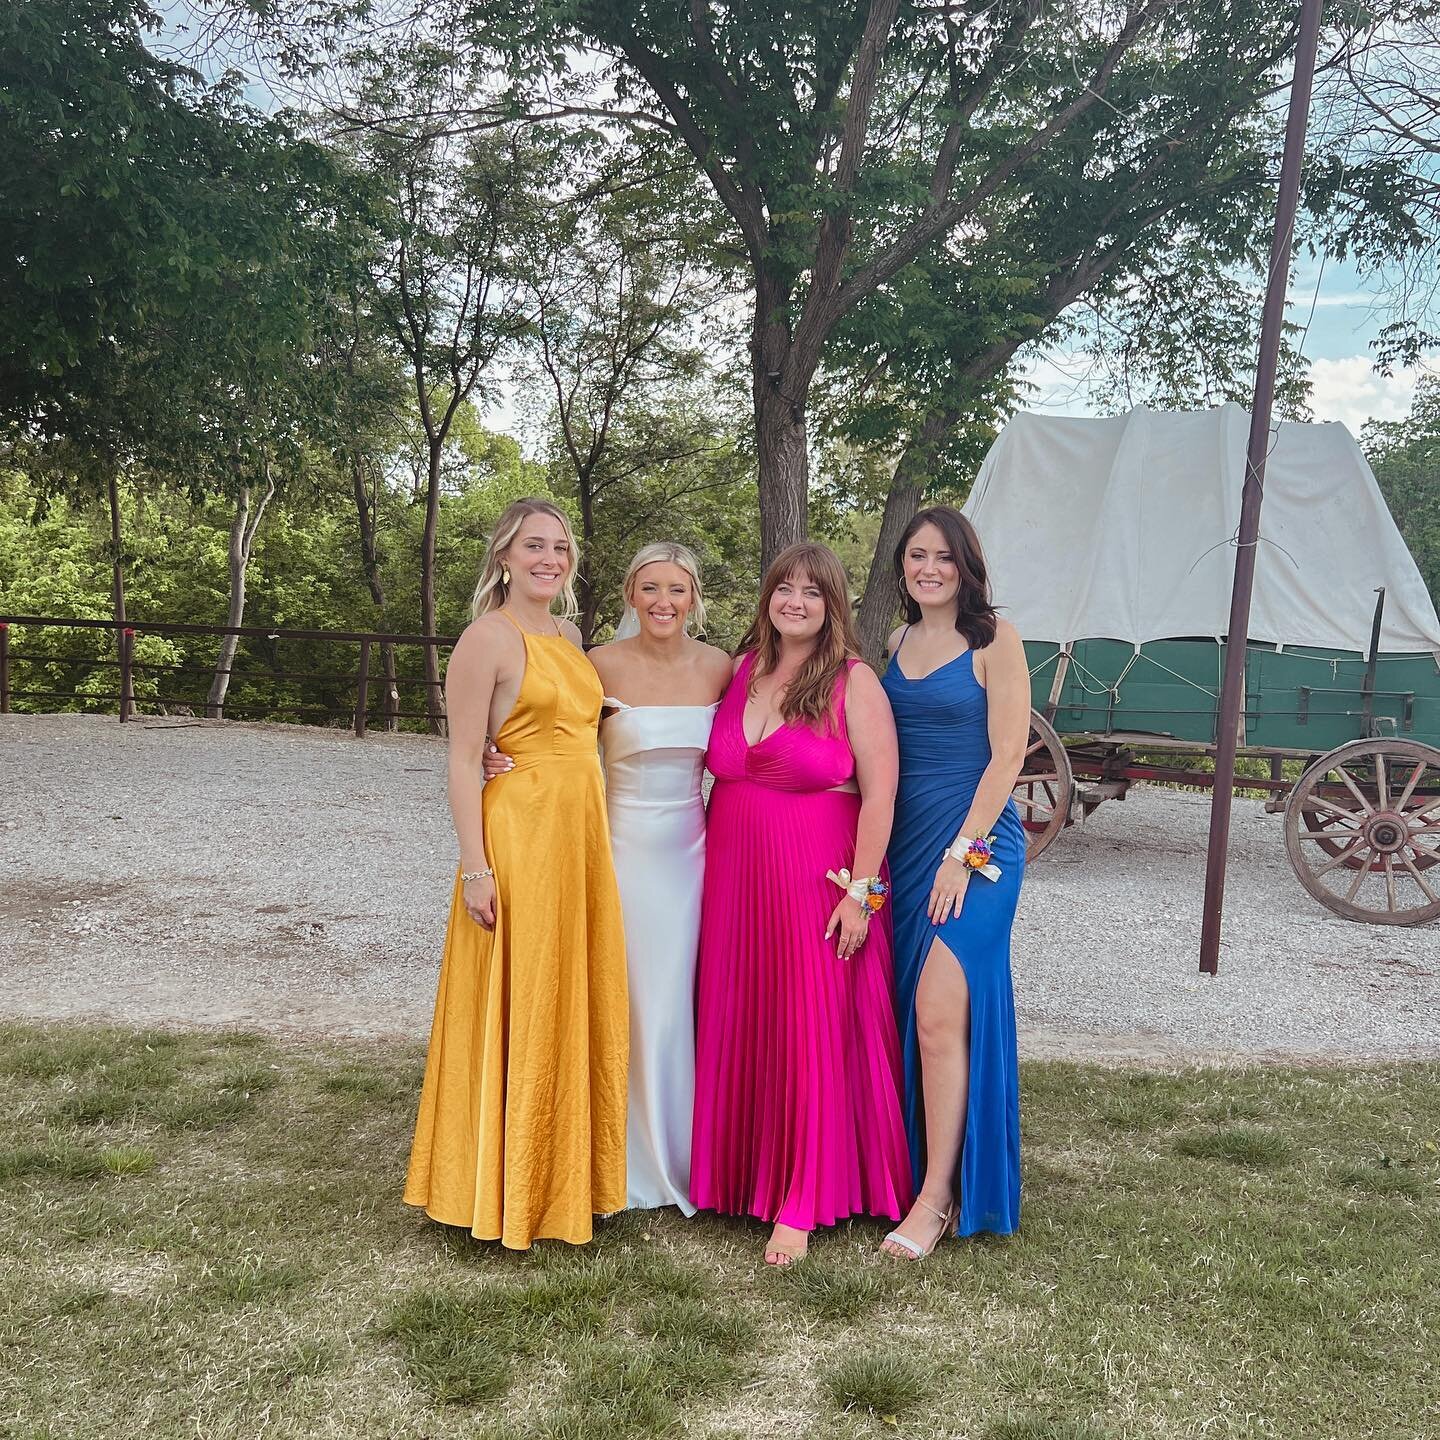 Yee haw 🤠🐂 The most stunning bride and the most beautiful wedding fort worth has ever seen! Congratulations to my oldest friend and her new husband 🤍  @nicolembernhart&mdash;you deserve all the happiness in the world, and i was so happy to be with